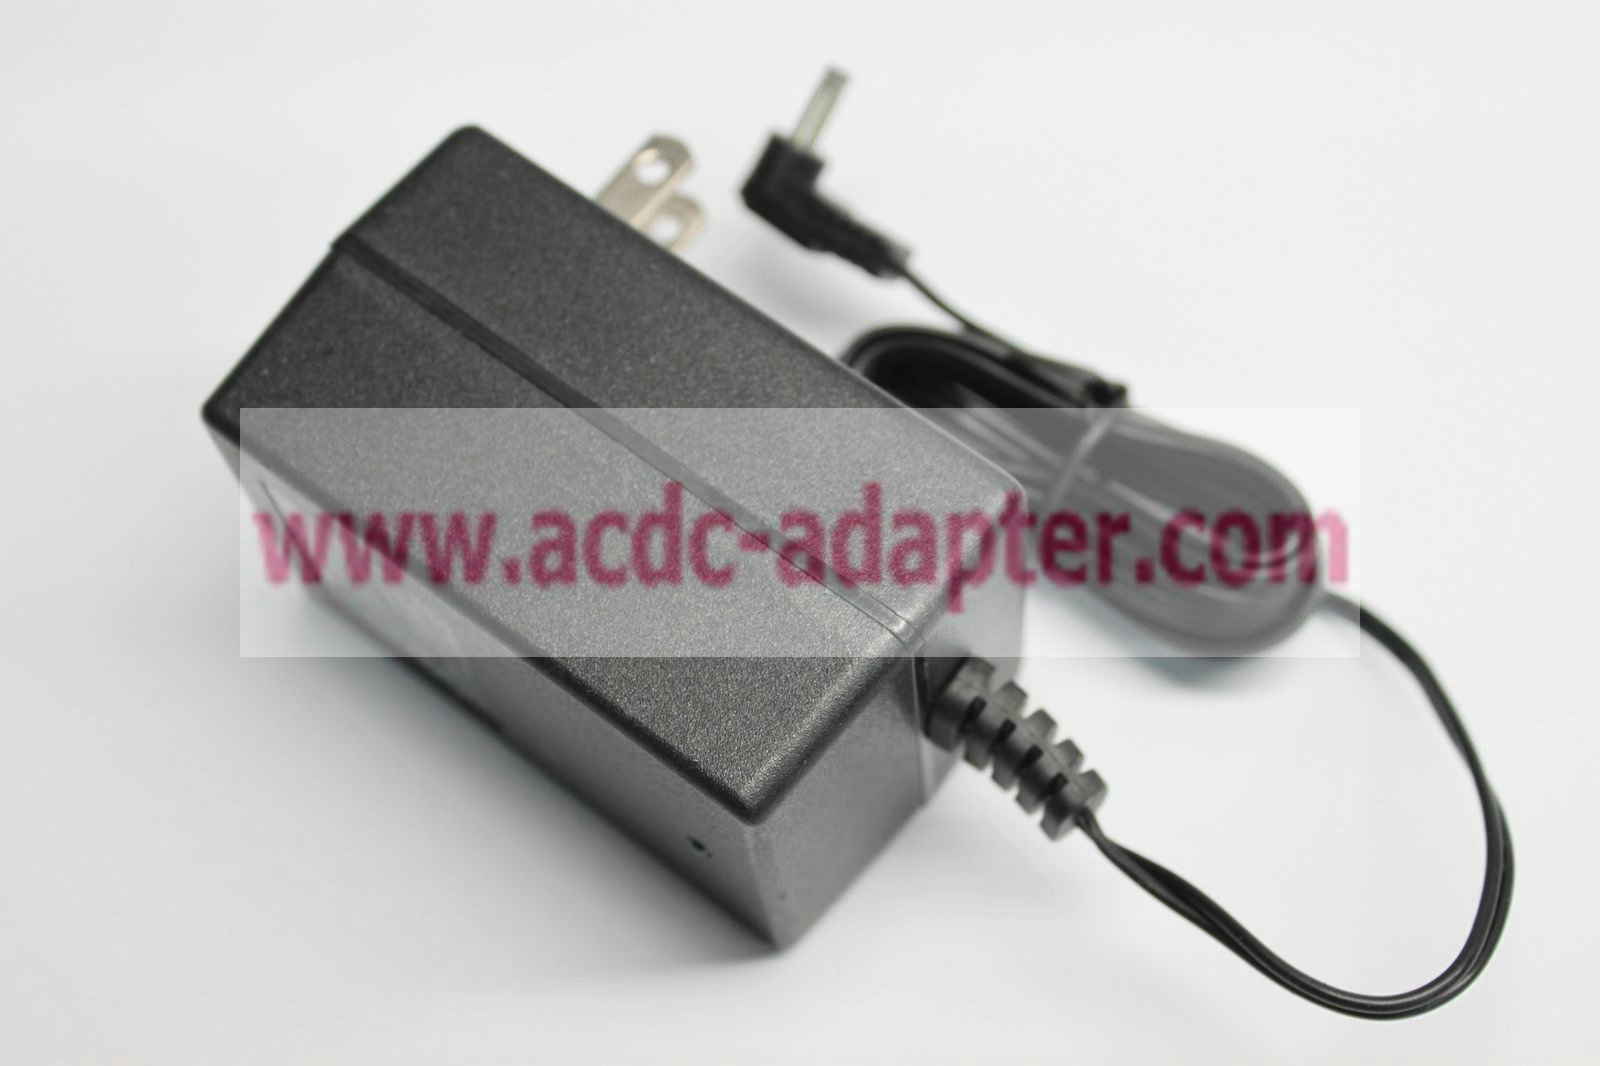 Genuine Actiontec AD-1260 Adapter Power Supply 12VDC 600mA Plug-In Class 2 Transfo - Click Image to Close